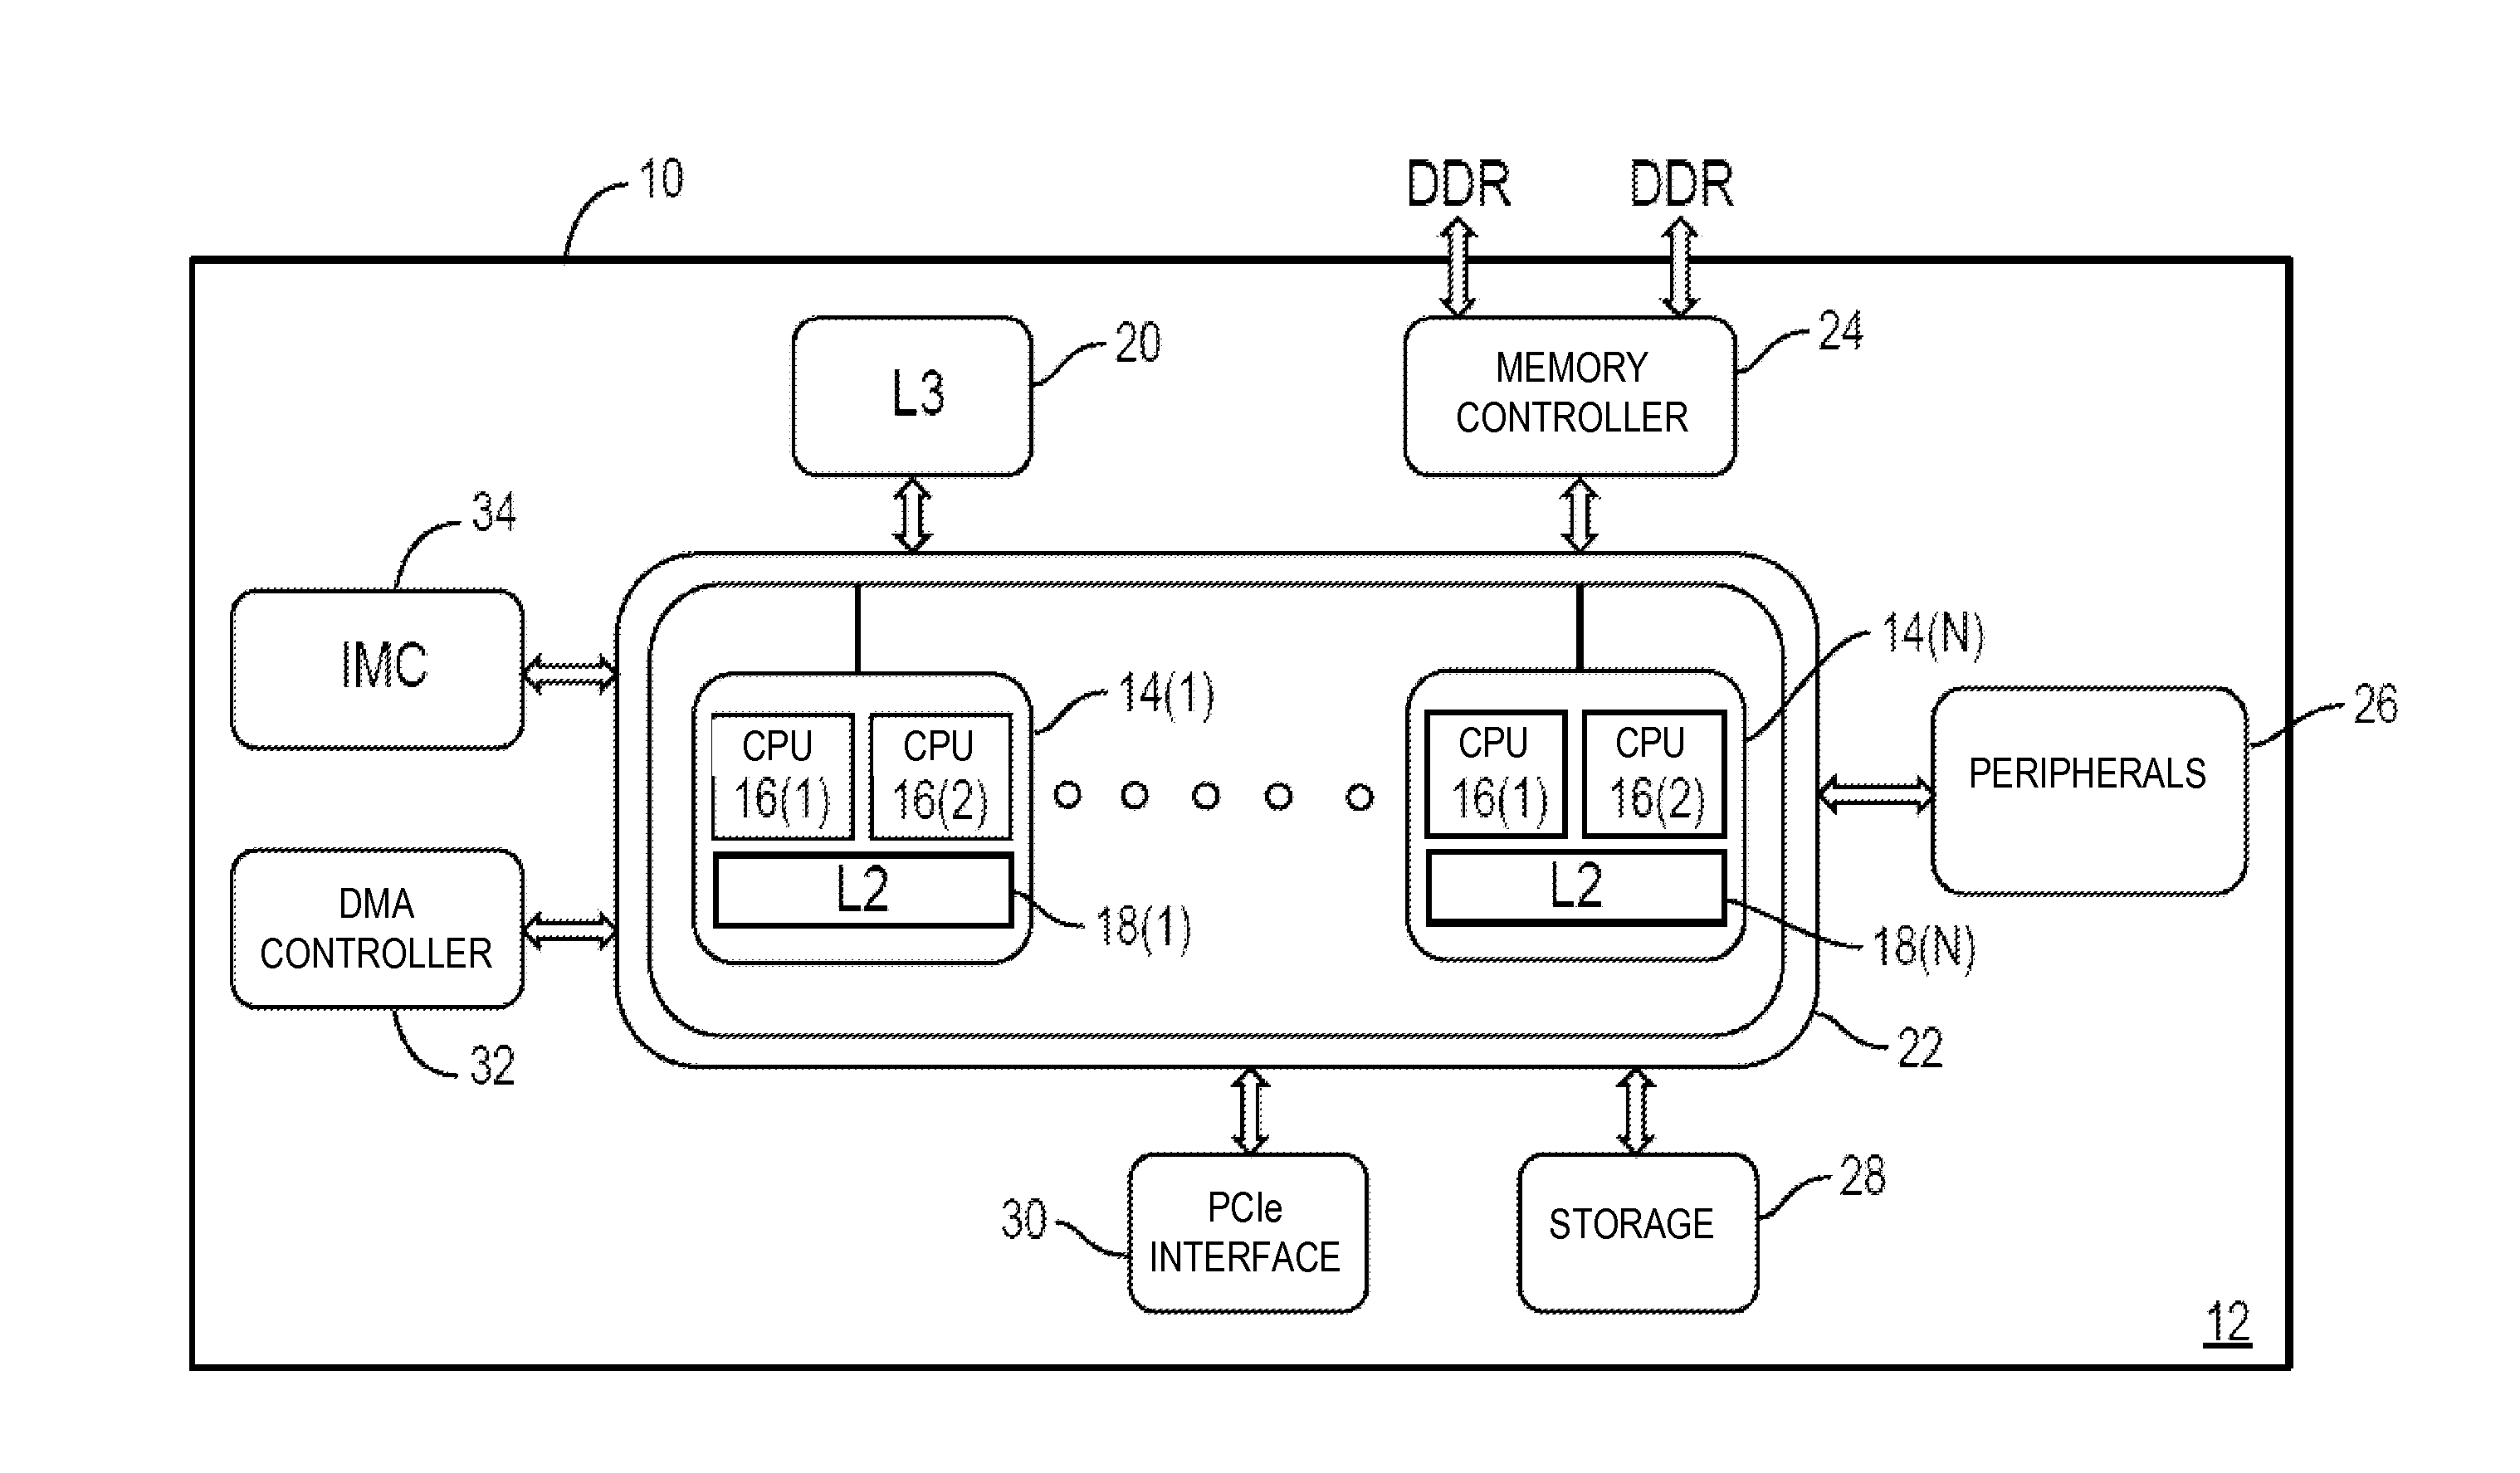 PROVIDING MEMORY BANDWIDTH COMPRESSION USING BACK-TO-BACK READ OPERATIONS BY COMPRESSED MEMORY CONTROLLERS (CMCs) IN A CENTRAL PROCESSING UNIT (CPU)-BASED SYSTEM